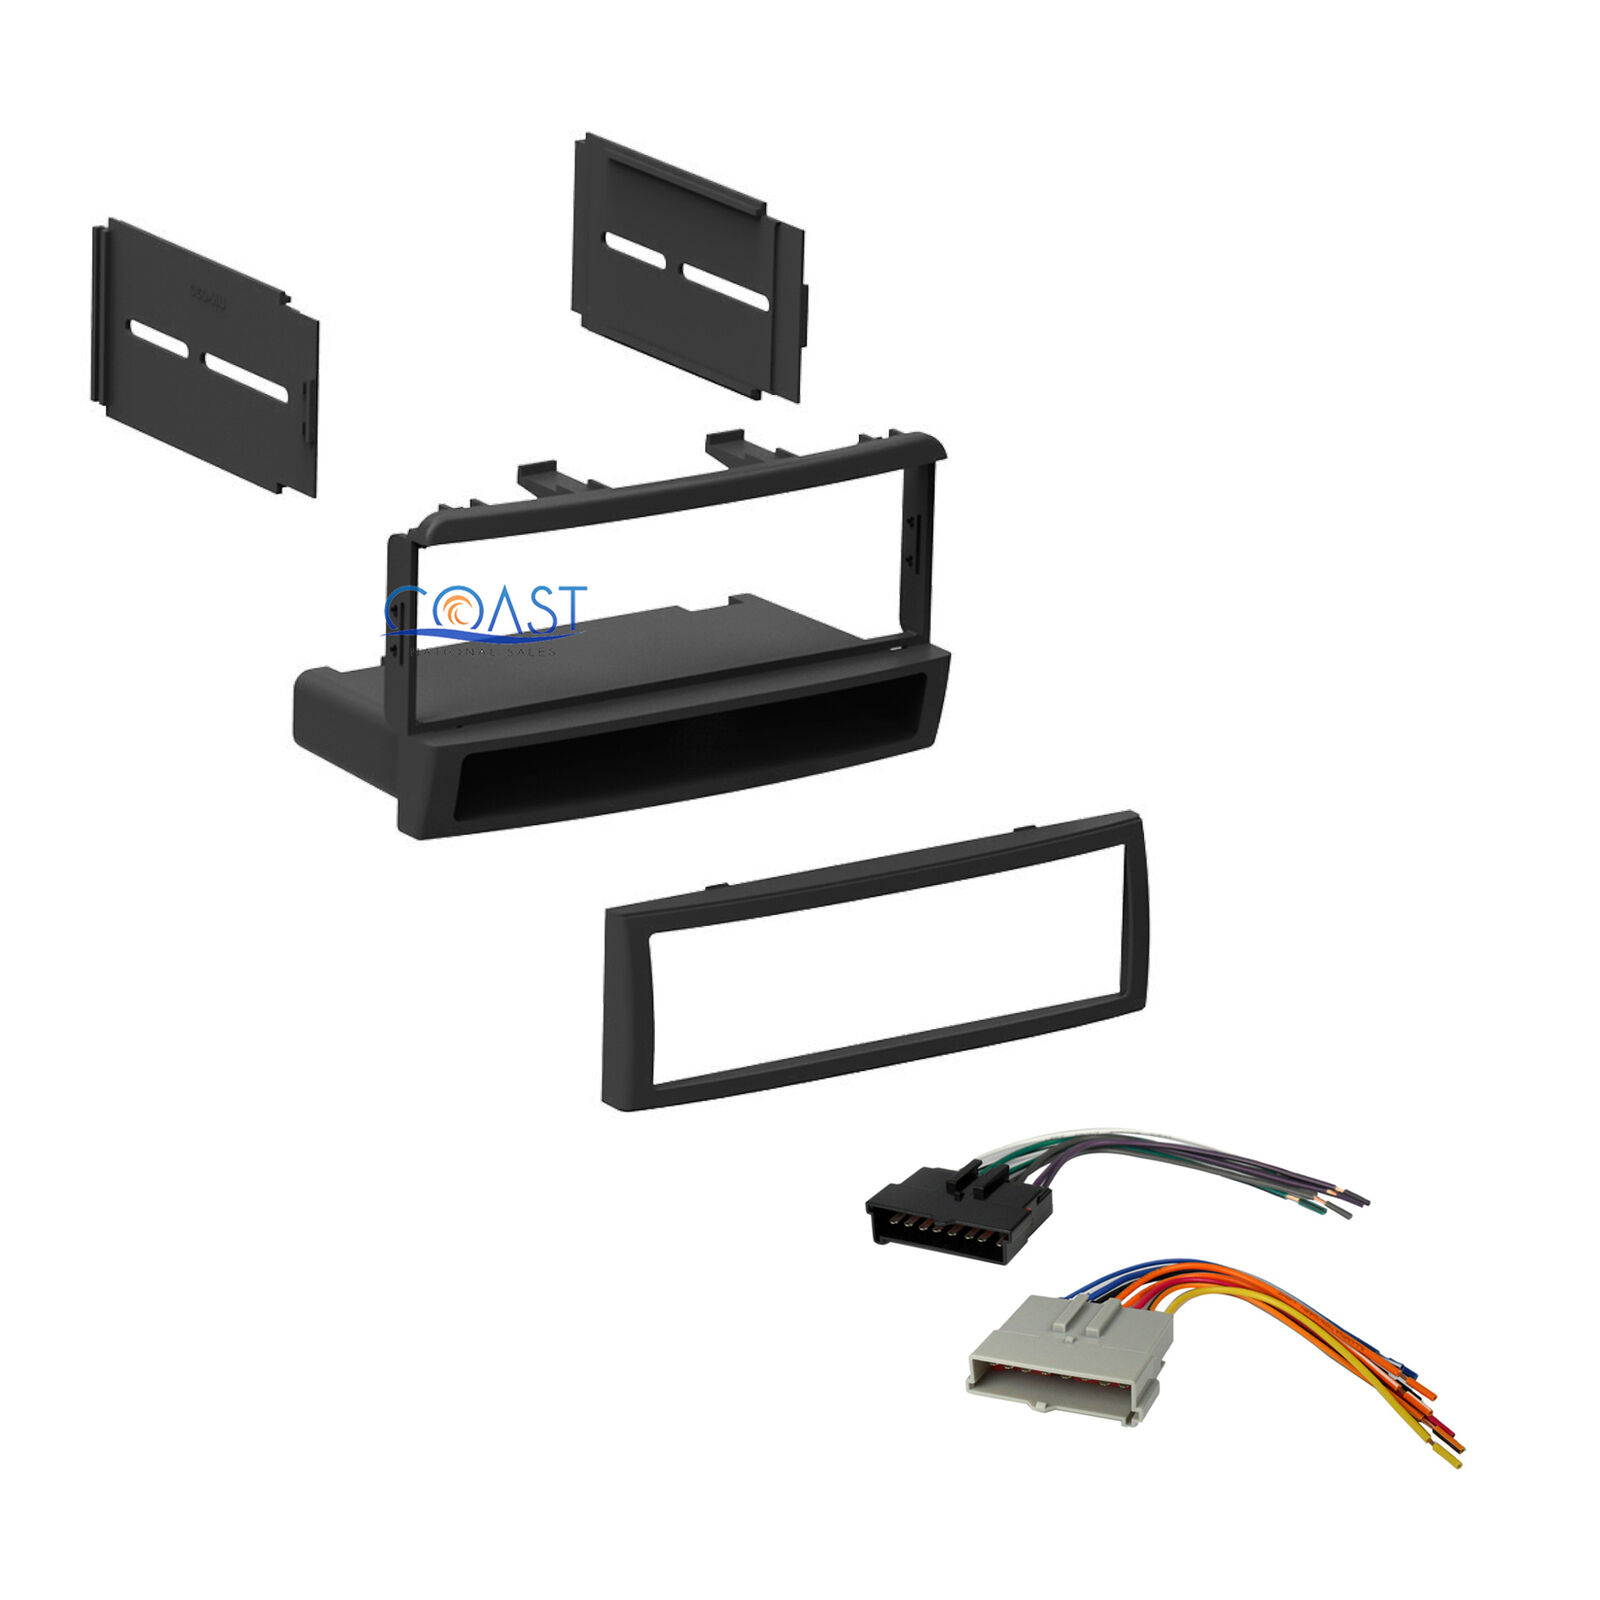 Single DIN Install Car Stereo Dash Kit for 1999-2004 Mercury Cougar/ Ford Focus 